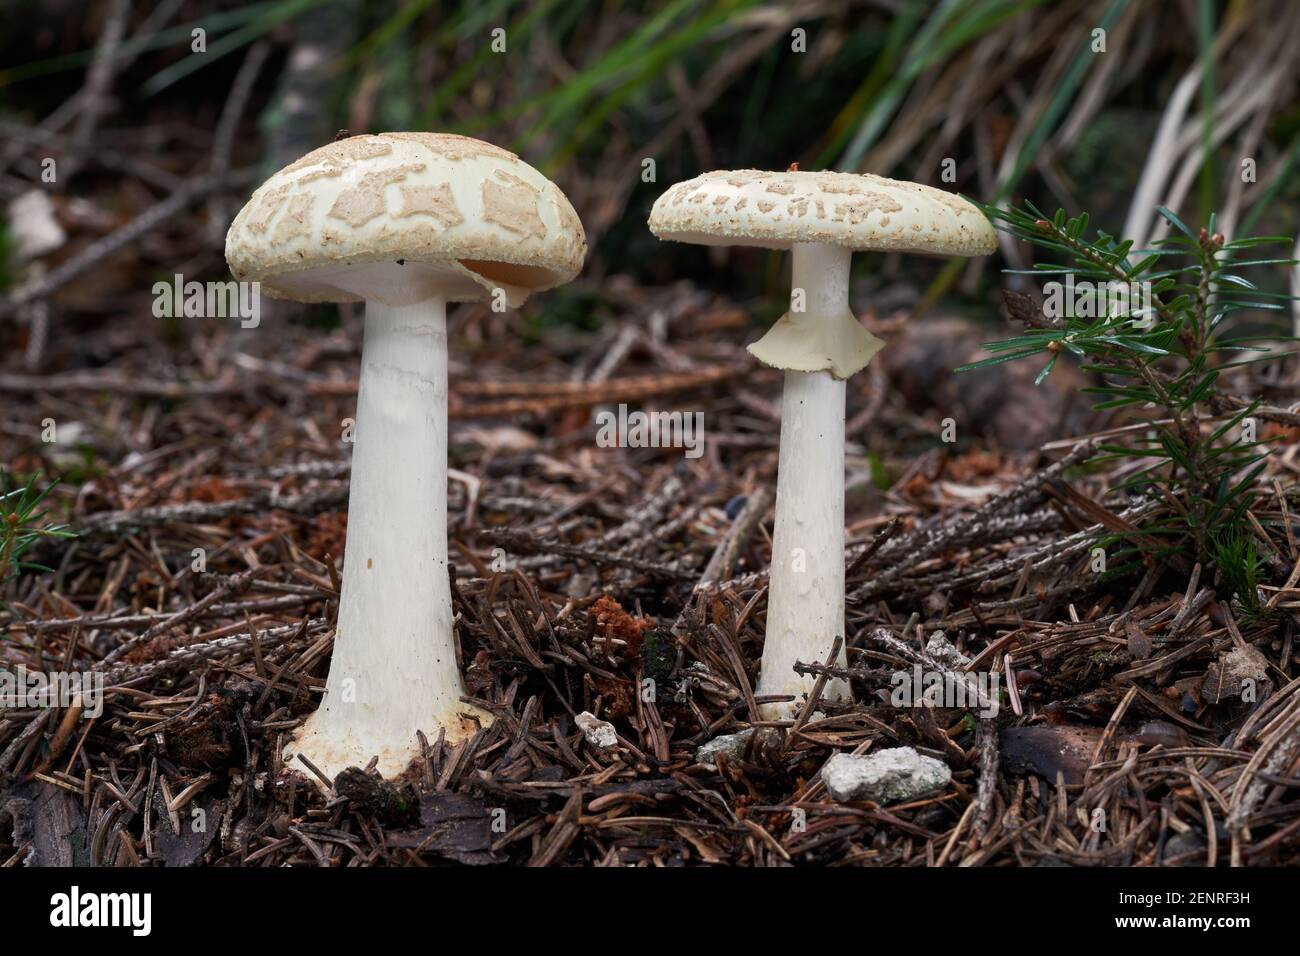 Inedible mushroom Amanita citrina in the spruce forest. Known as false death cap or Citron Amanita. Wild mushrooms growing in the needles. Stock Photo